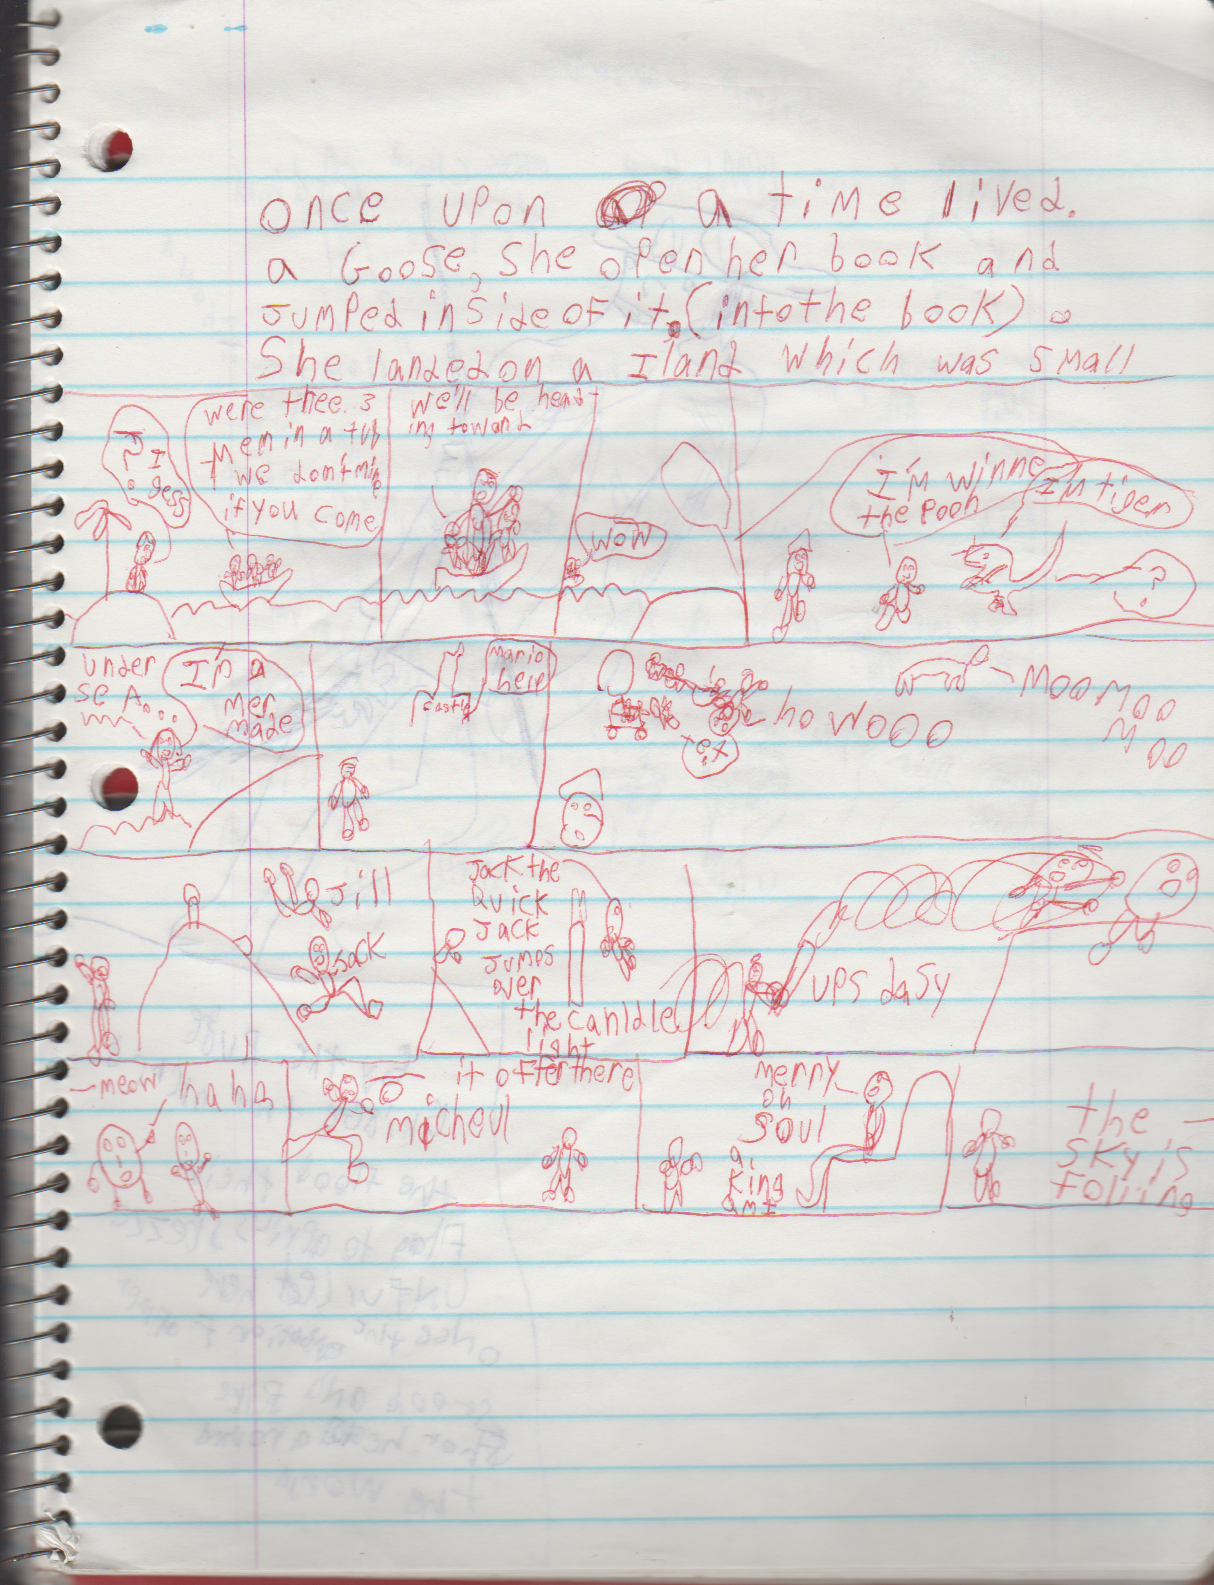 1996-08-18 - Saturday - 11 yr old Joey Arnold's School Book, dates through to 1998 apx, mostly 96, Writings, Drawings, Etc-048.png